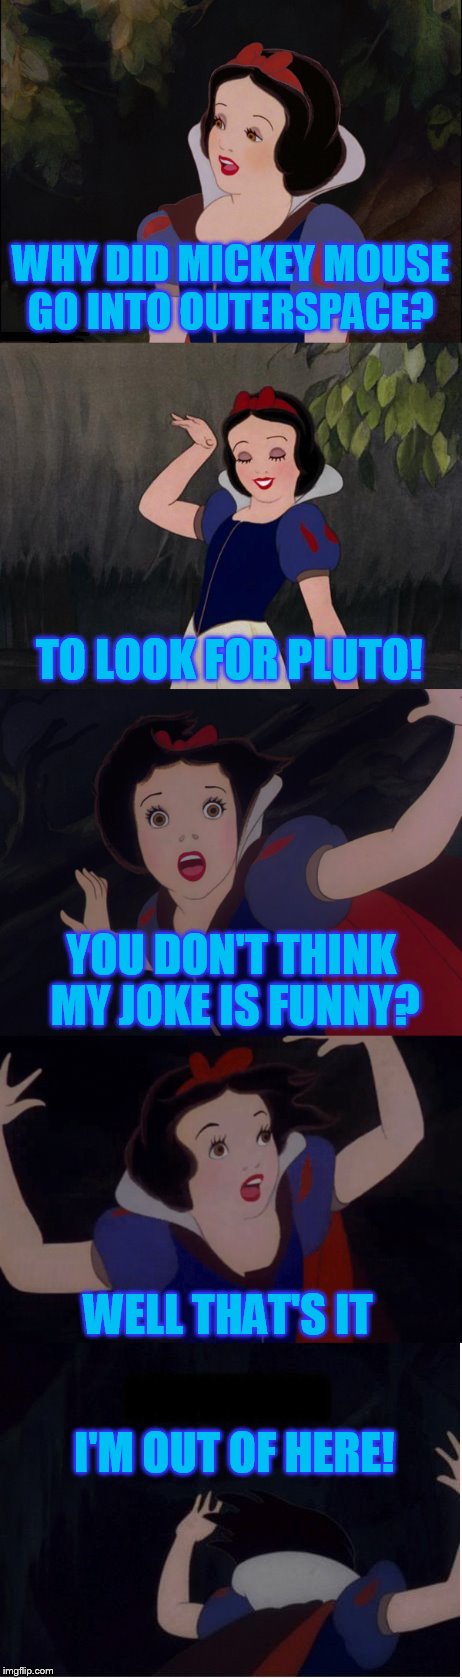 When A Princess Becomes A Drama Queen! (Fairy Tale Week, a socrates & Red Riding Hood event, Feb 12-19) |  WHY DID MICKEY MOUSE GO INTO OUTERSPACE? TO LOOK FOR PLUTO! YOU DON'T THINK MY JOKE IS FUNNY? WELL THAT'S IT; I'M OUT OF HERE! | image tagged in memes,snow white,fairy tail,fairy tale week,drama queen | made w/ Imgflip meme maker